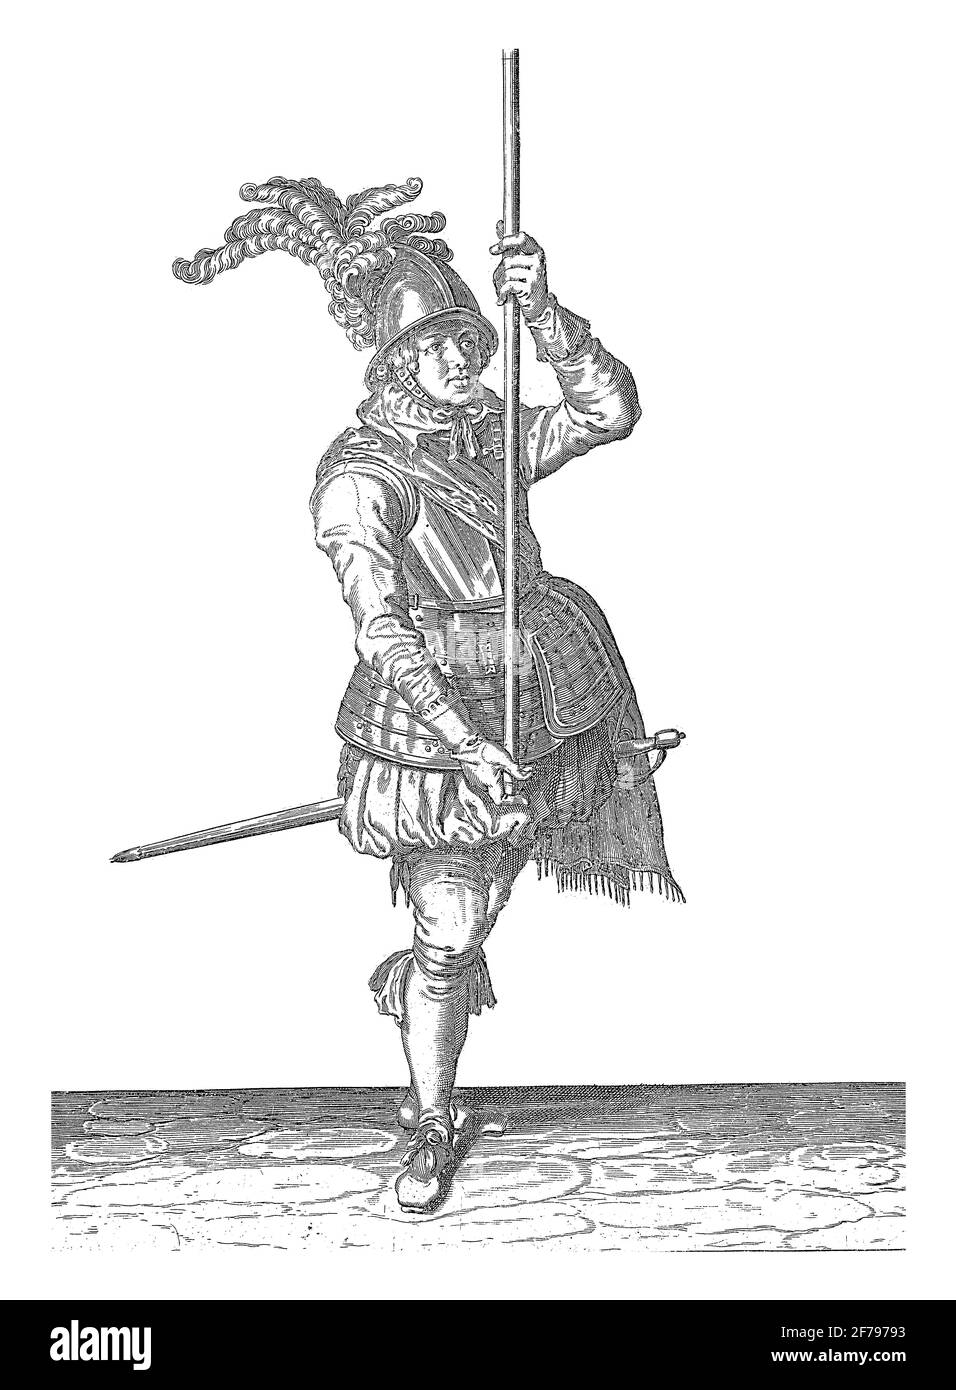 A Soldier, Full Length holding a skewer (lance) with both hands upright high above the ground, vintage engraving. Stock Photo